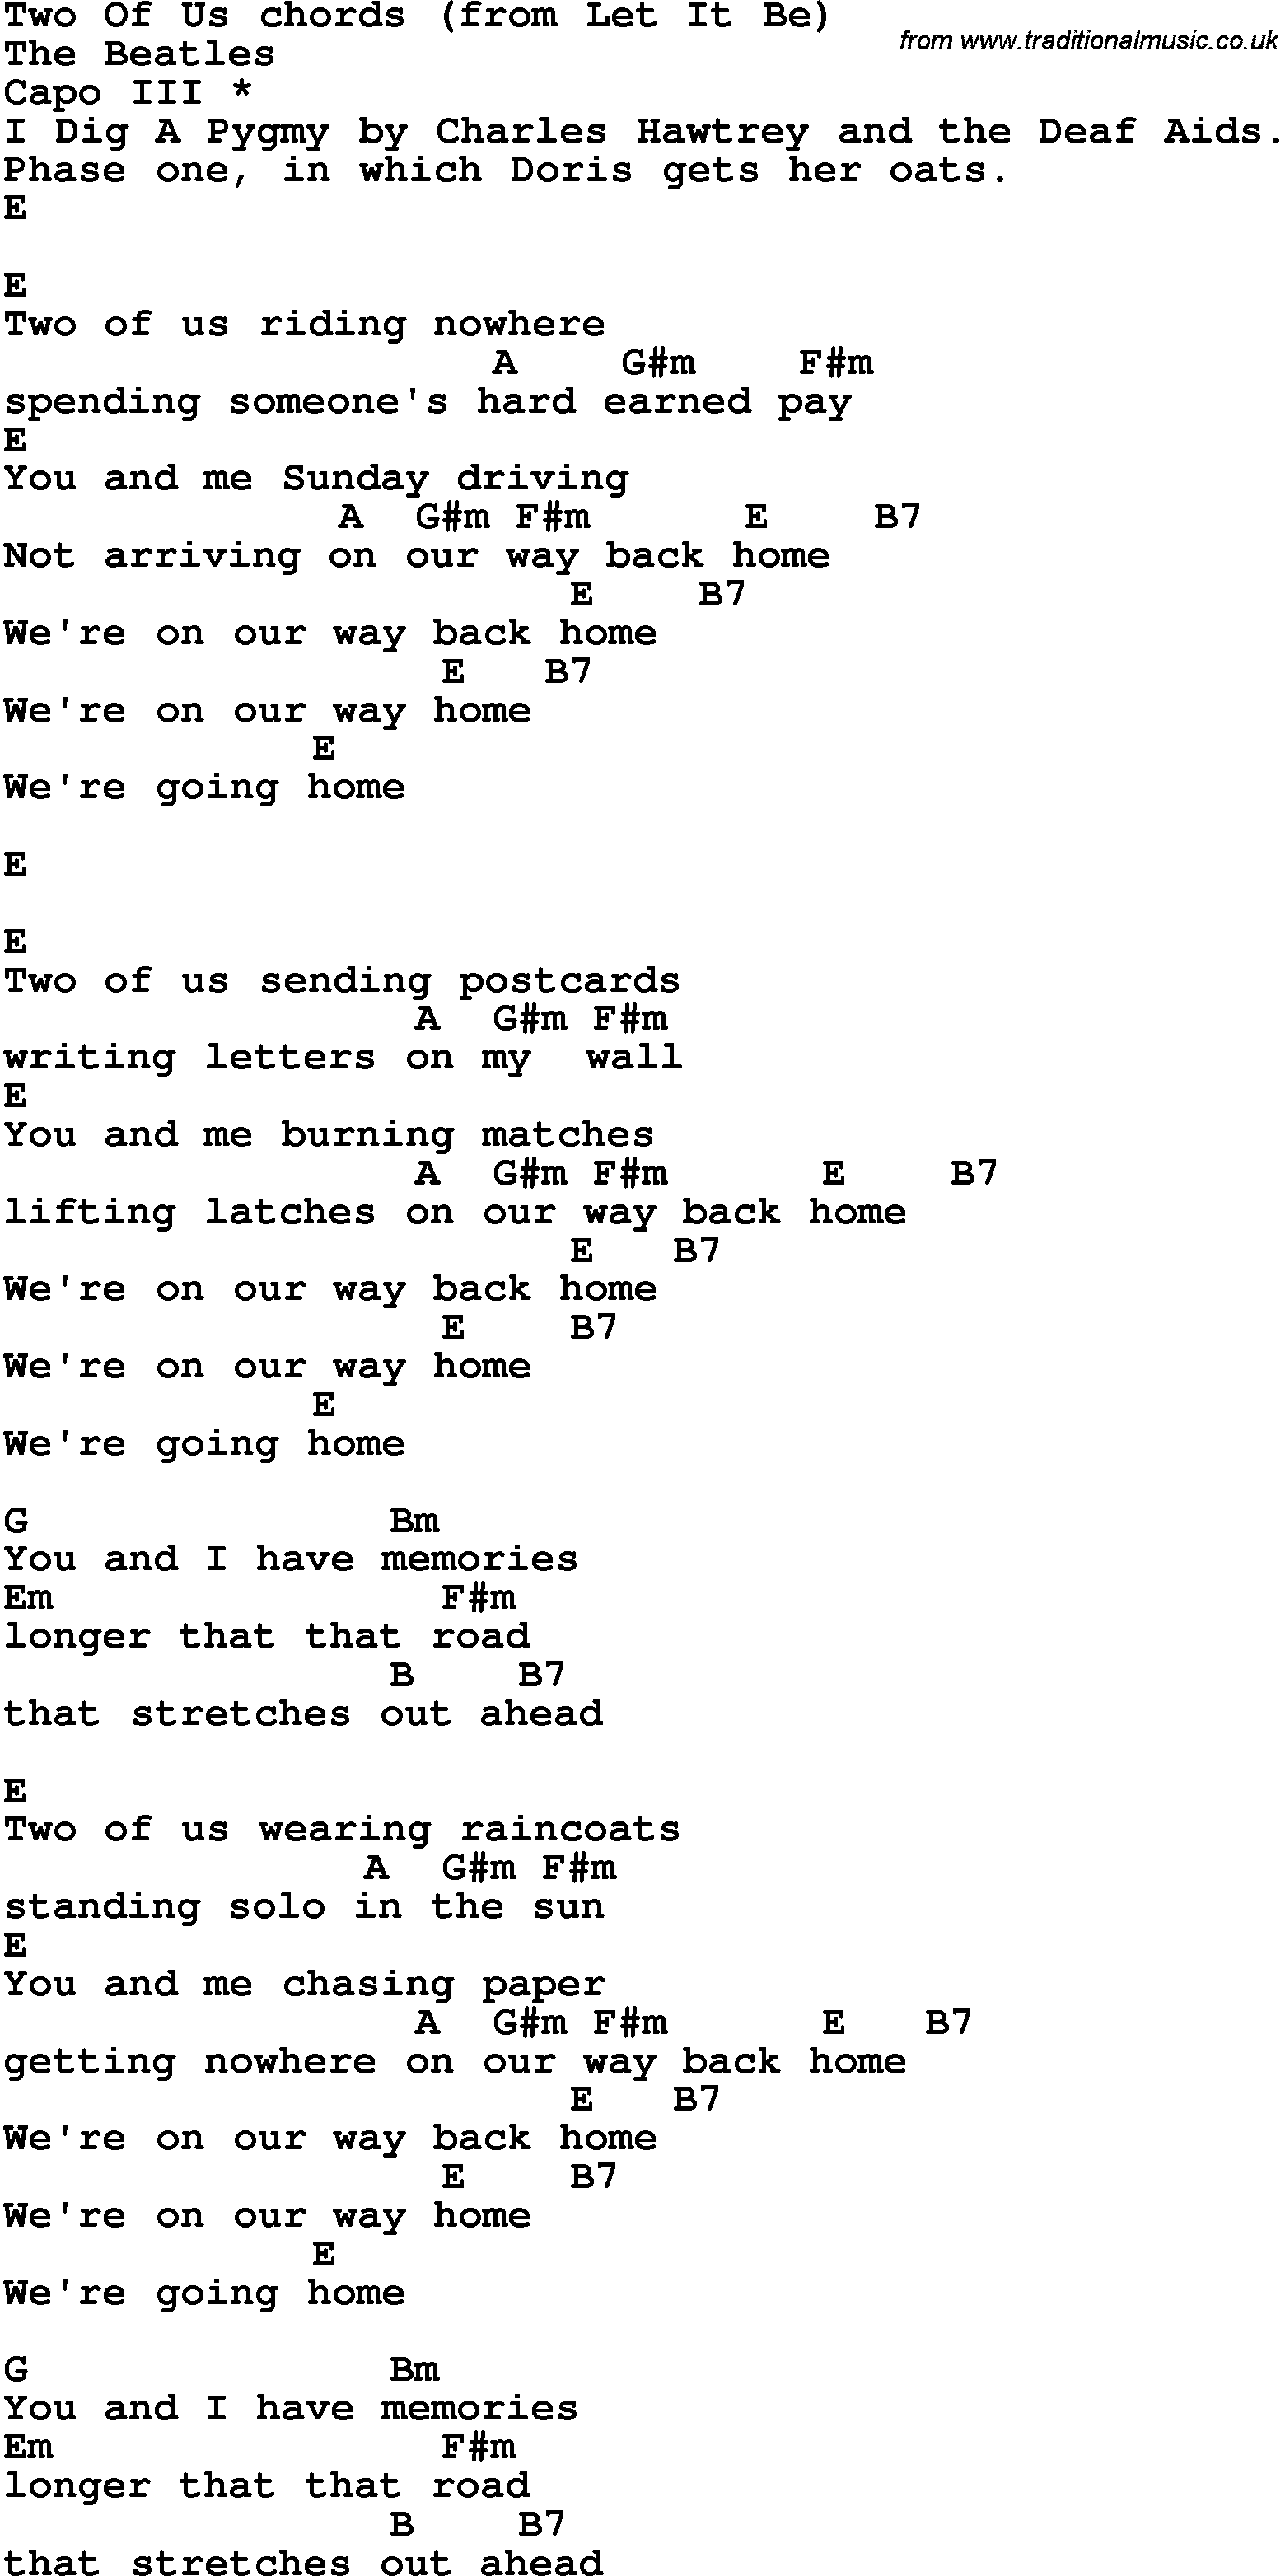  The Beatles - Two Of Us (Chords)